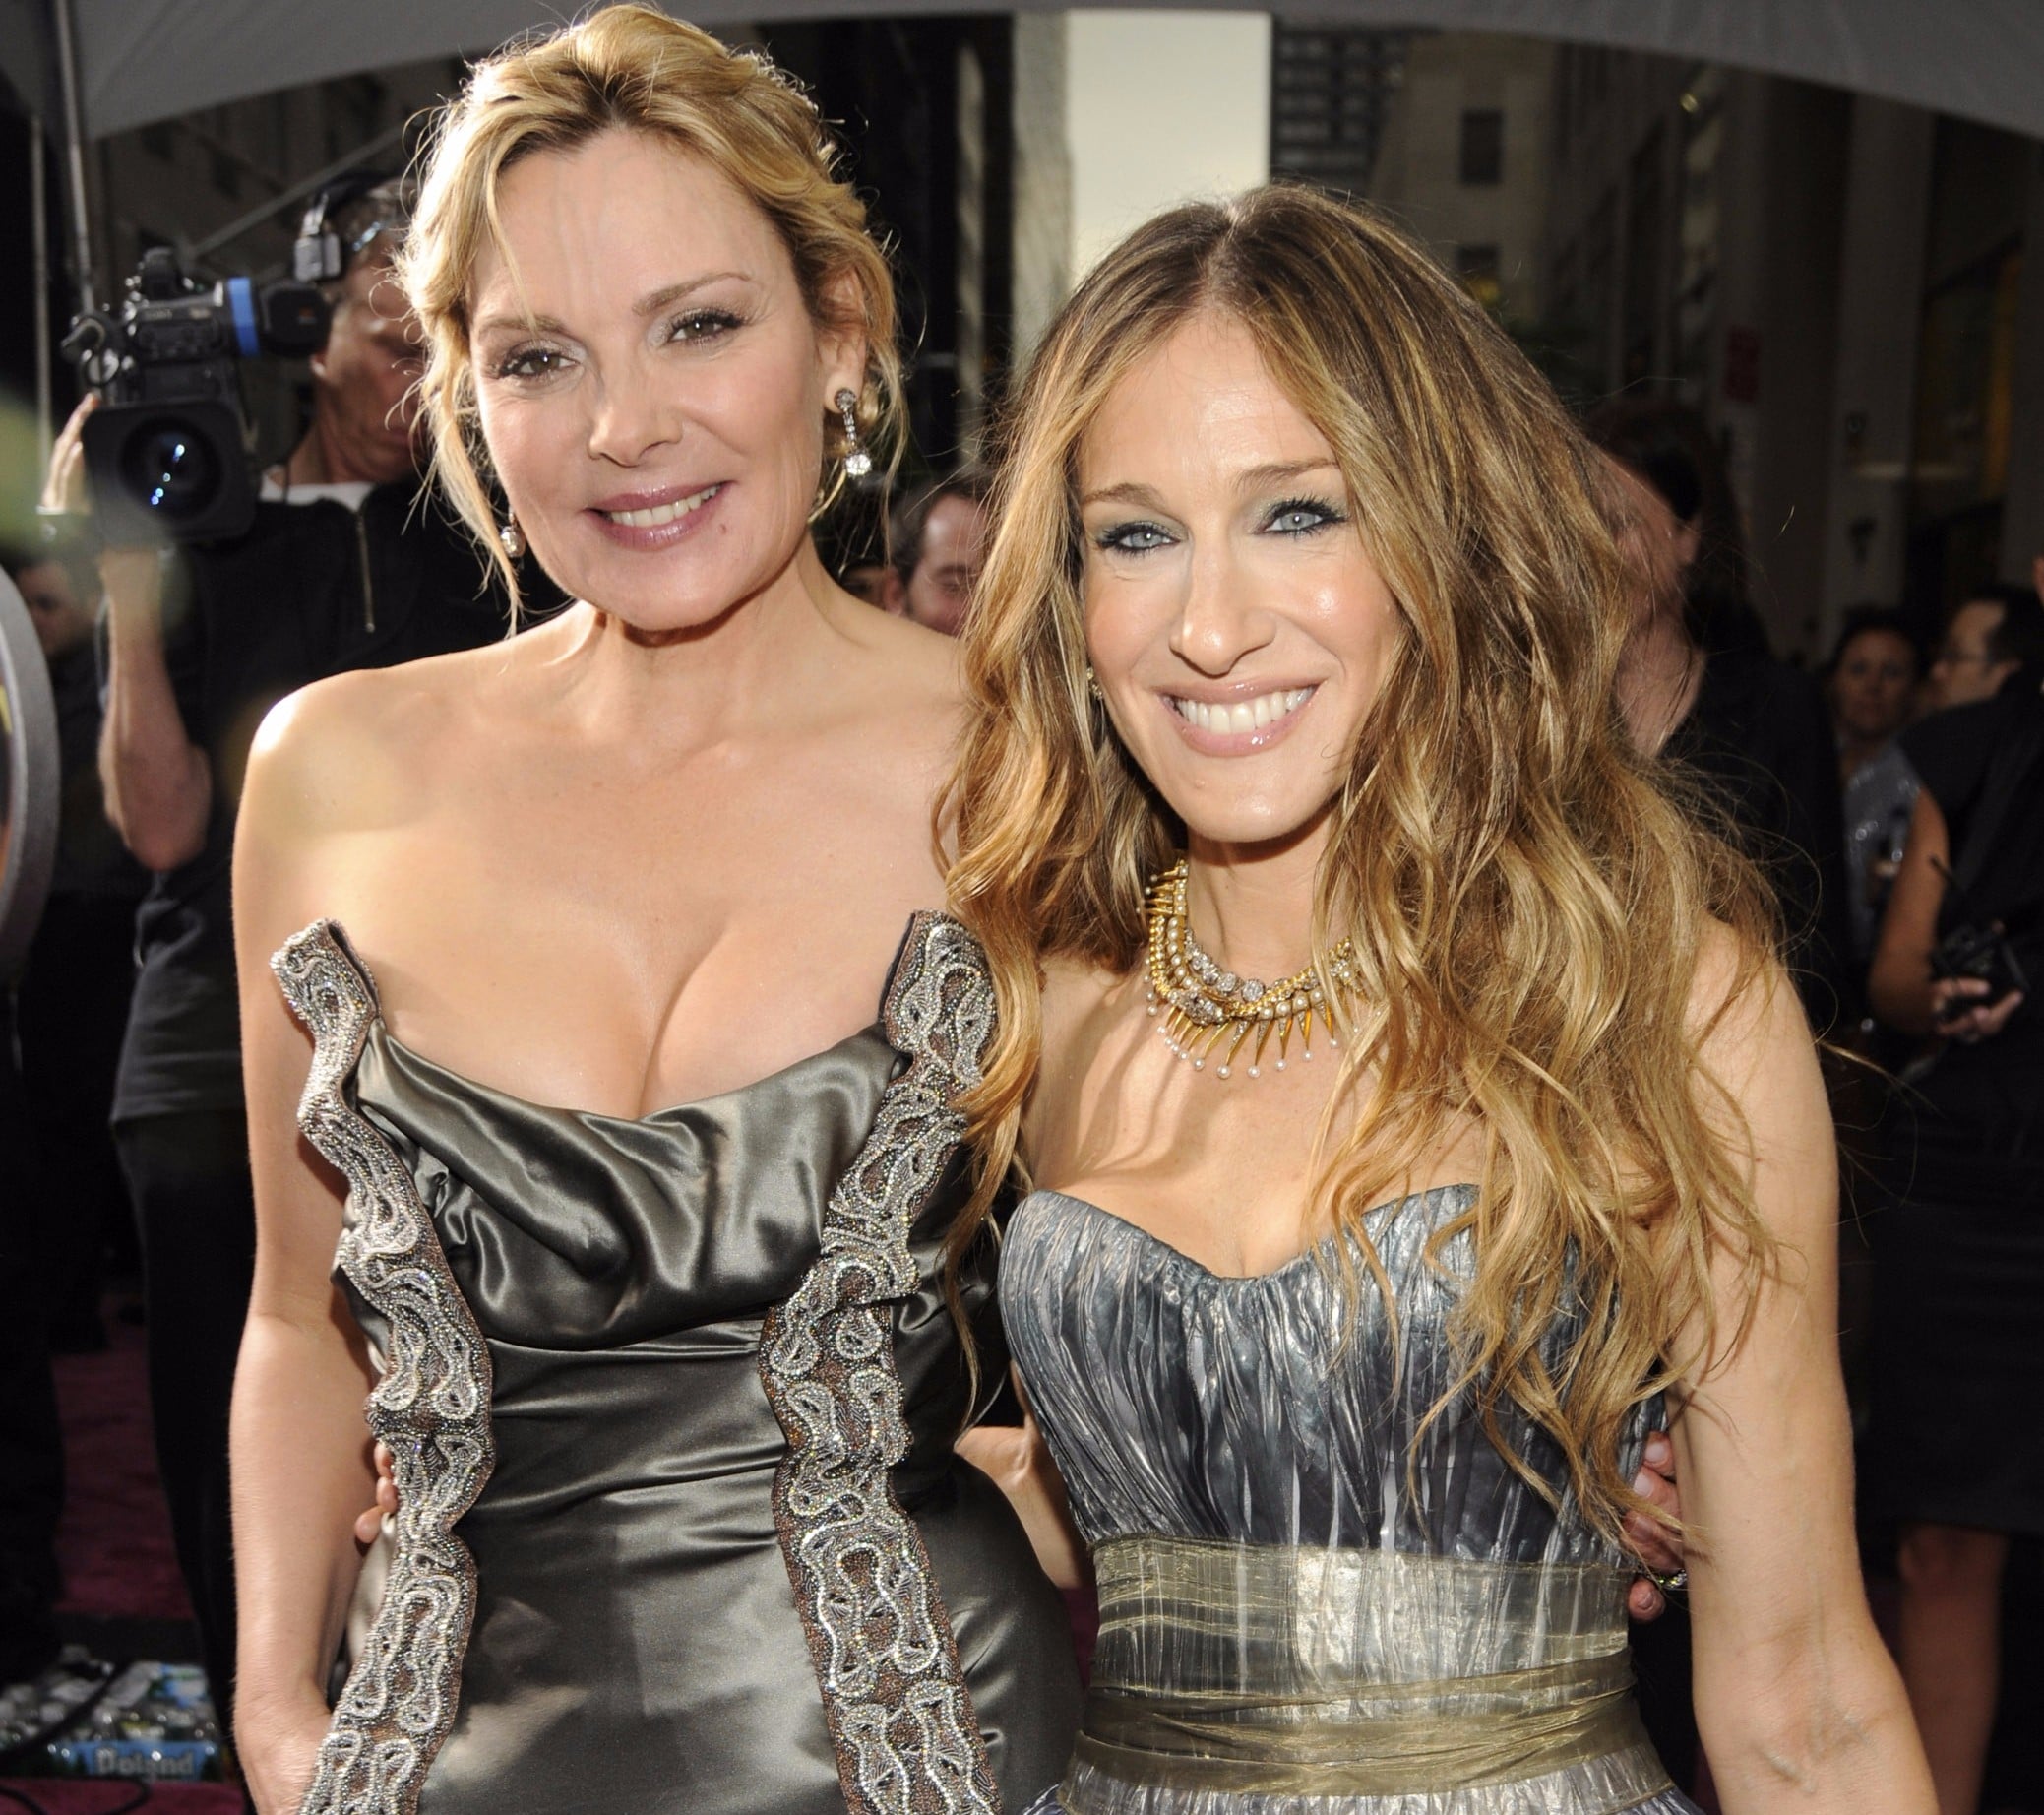 Inside the toxic decade-long feud between Sex And The City stars Sarah  Jessica Parker and Kim Cattrall